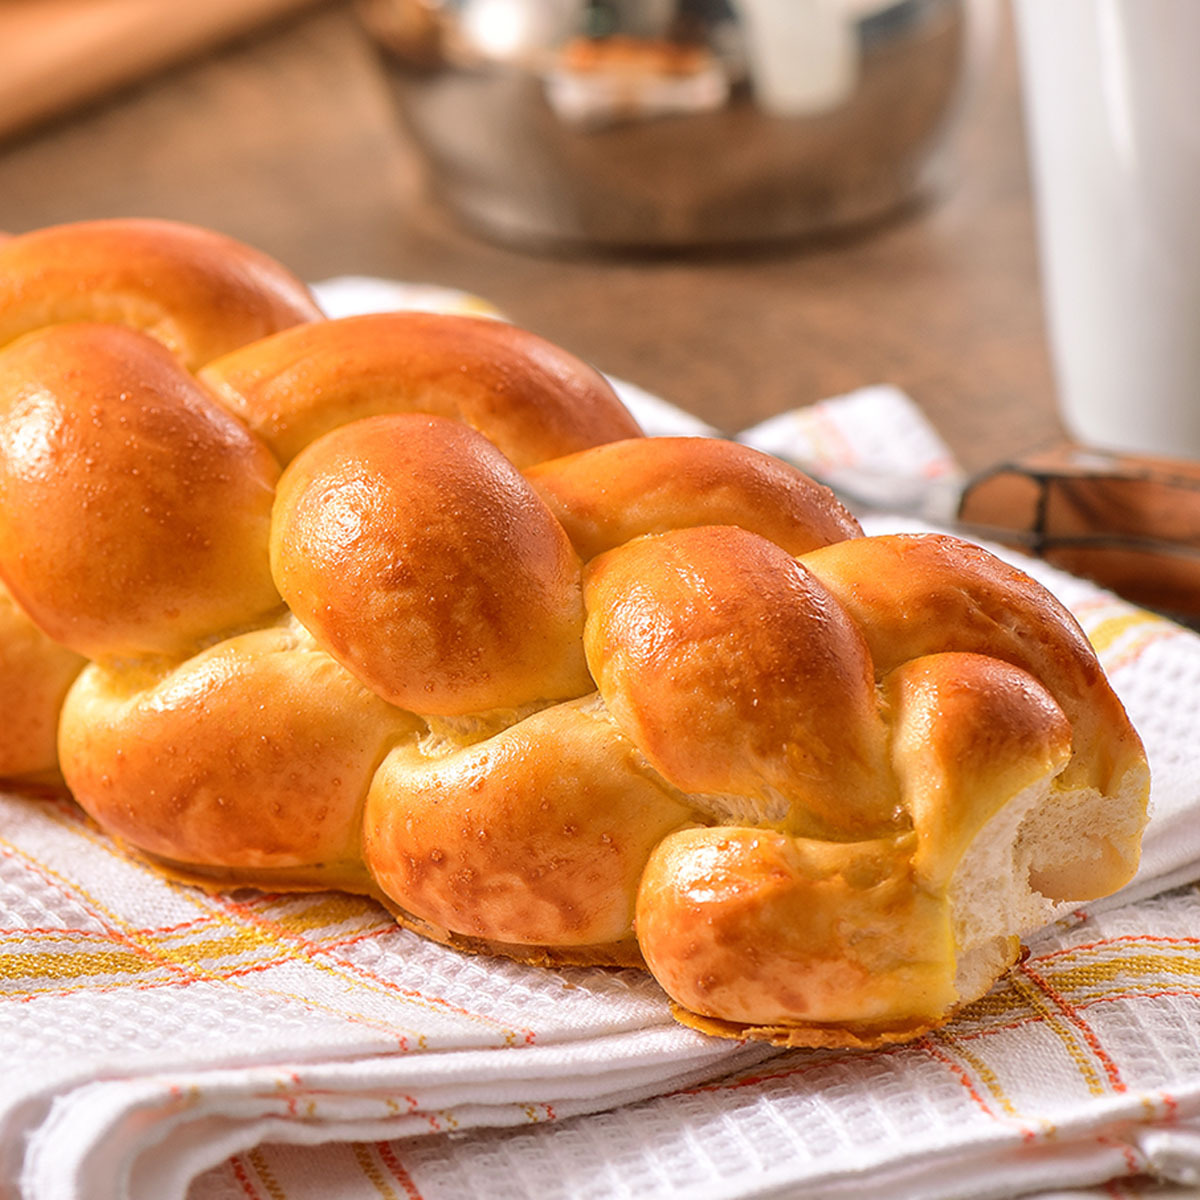 There’s a Subscription for That: Challah Bread